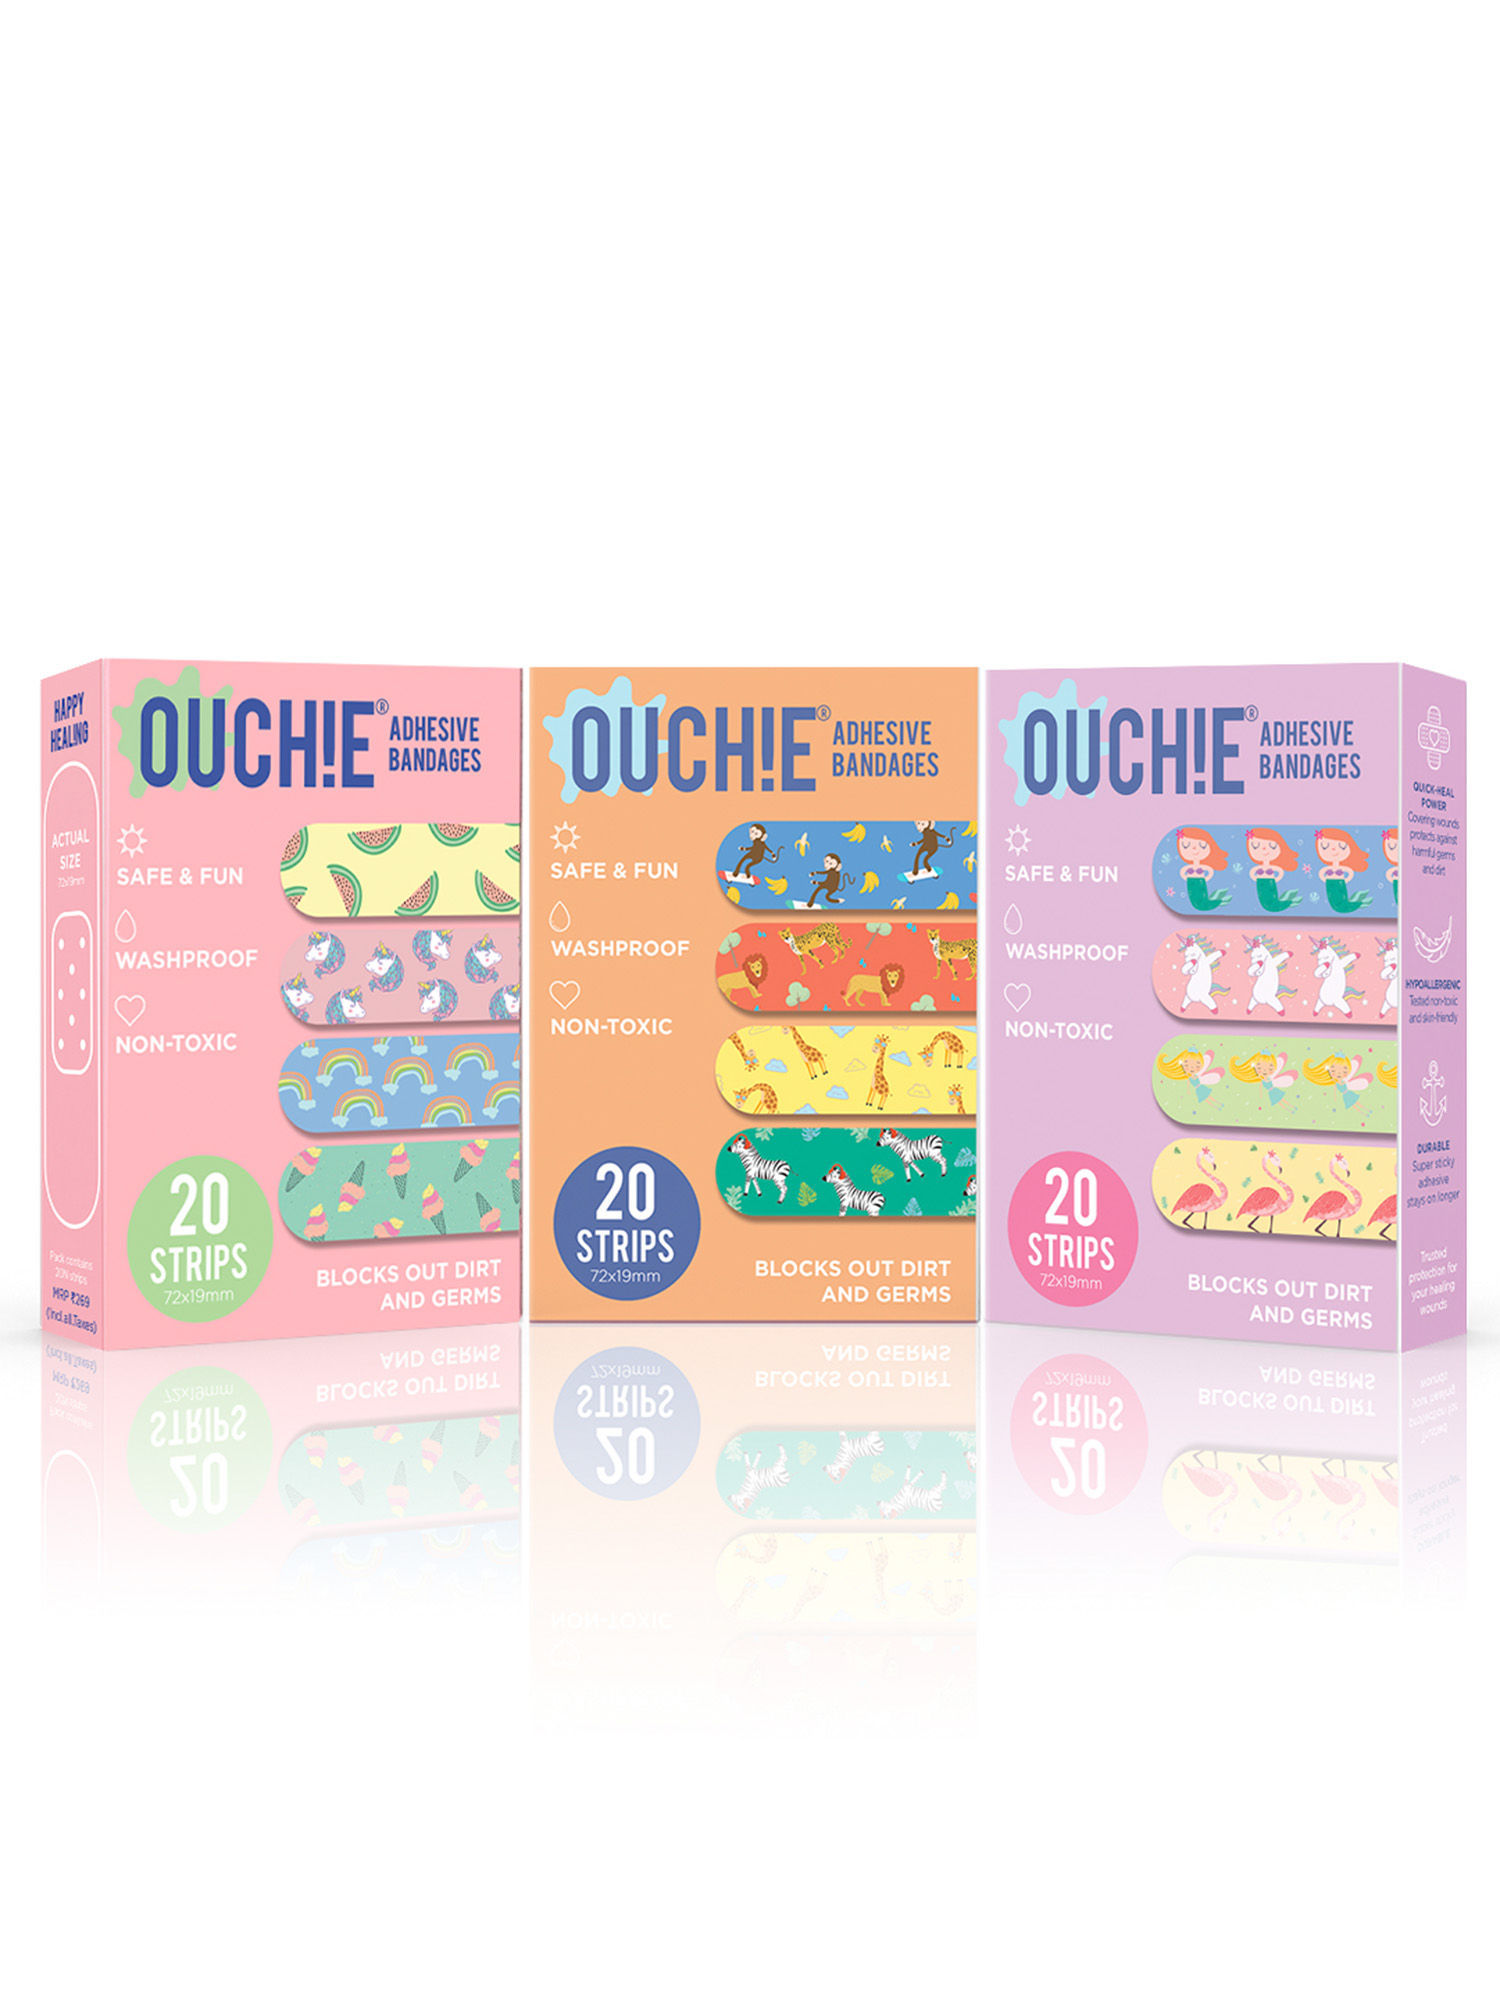 OUCHIE Non-toxic Printed Bandages Triple Combo (pack Of 60) - Orange